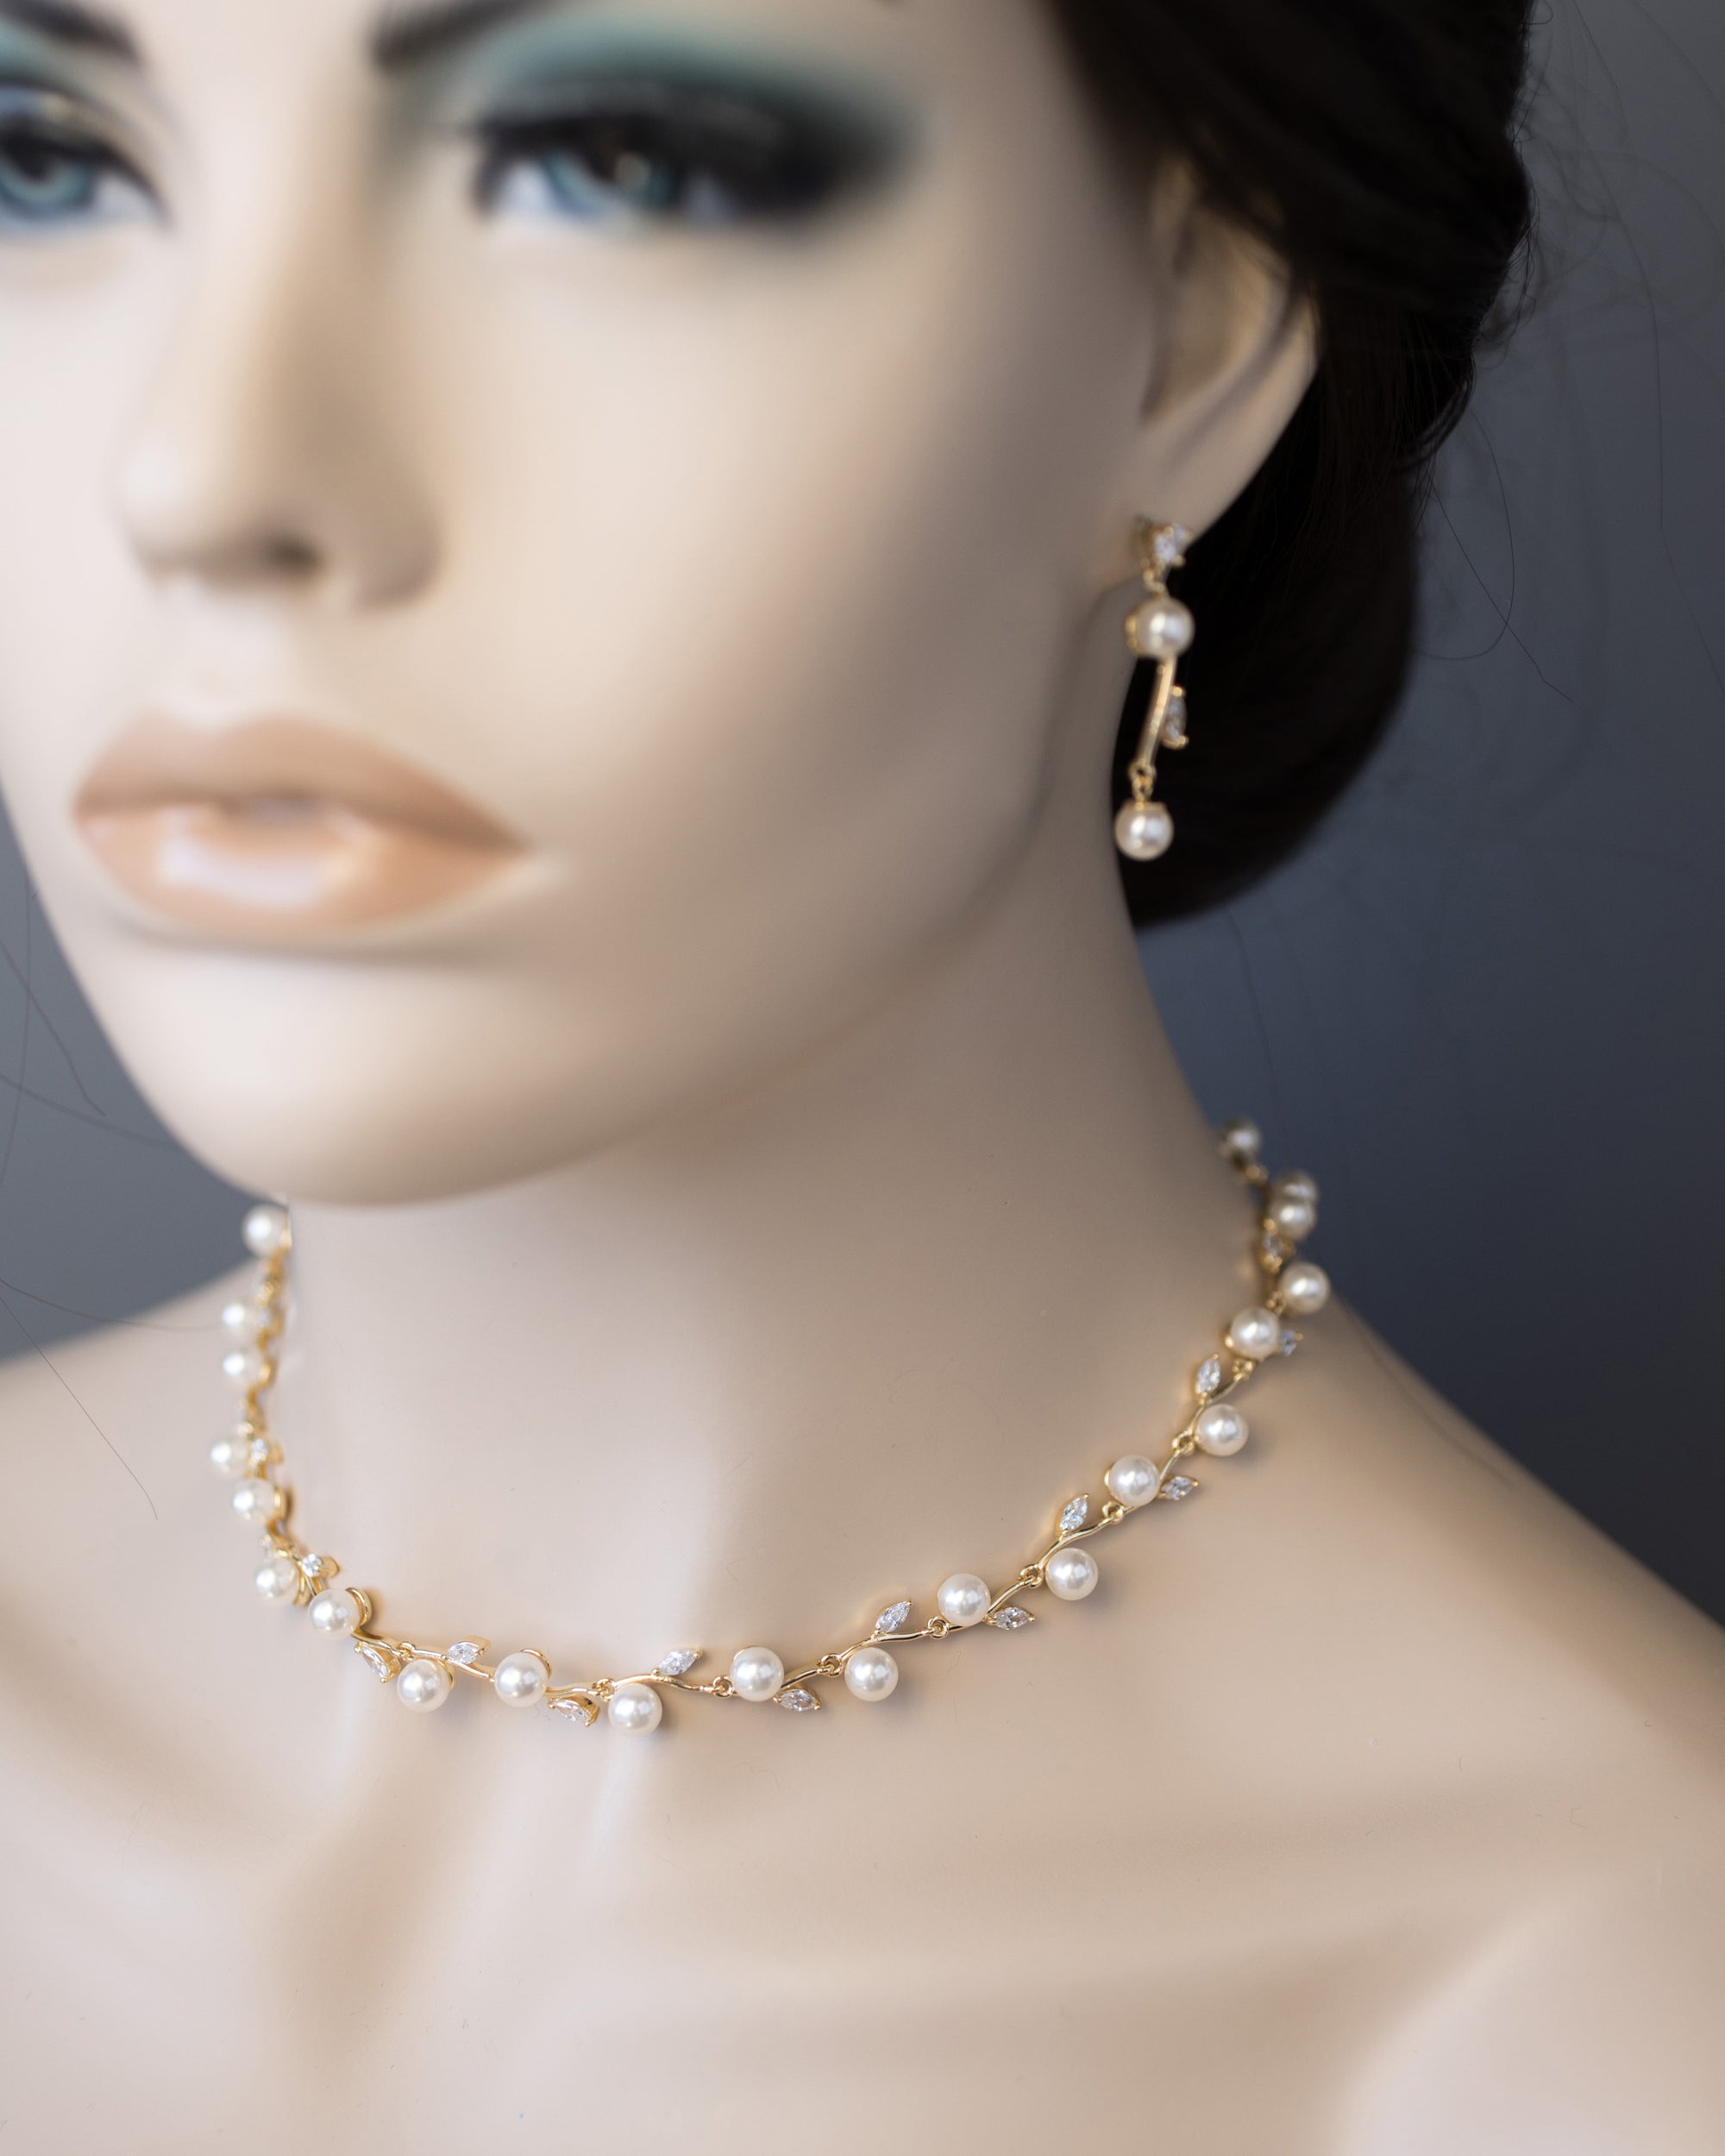 Bridal Jewelry Necklace Set with Pearl Flower and CZ - Cassandra